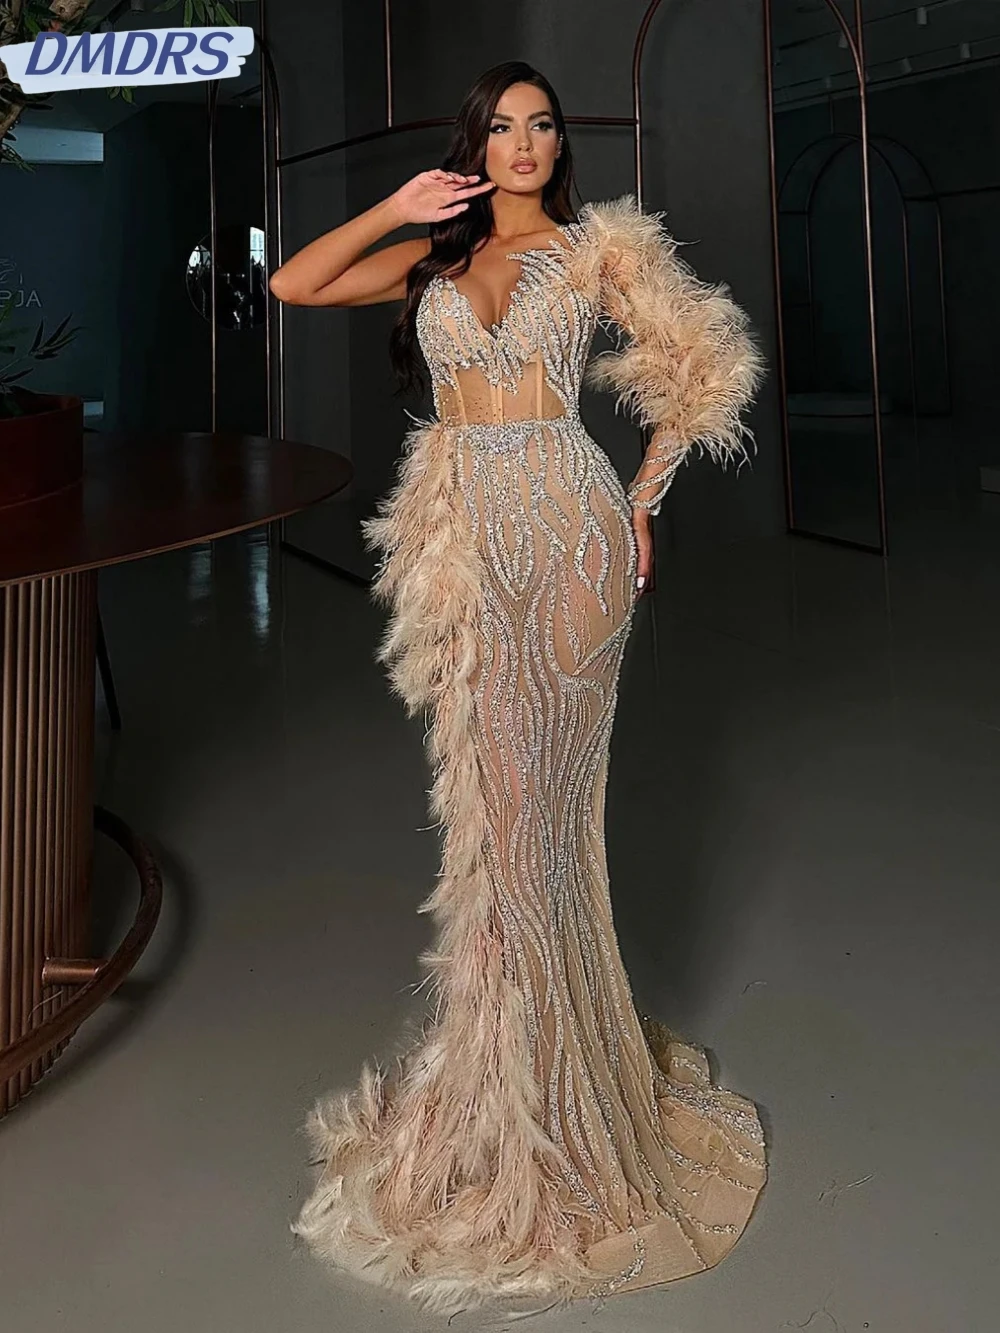 

Sexy Illusion Deep V-neck Cocktail Dresses Sparkly Sequins Beads Evening Dress Luxury Feathers Mermaid Prom Gown Robe De Mariée